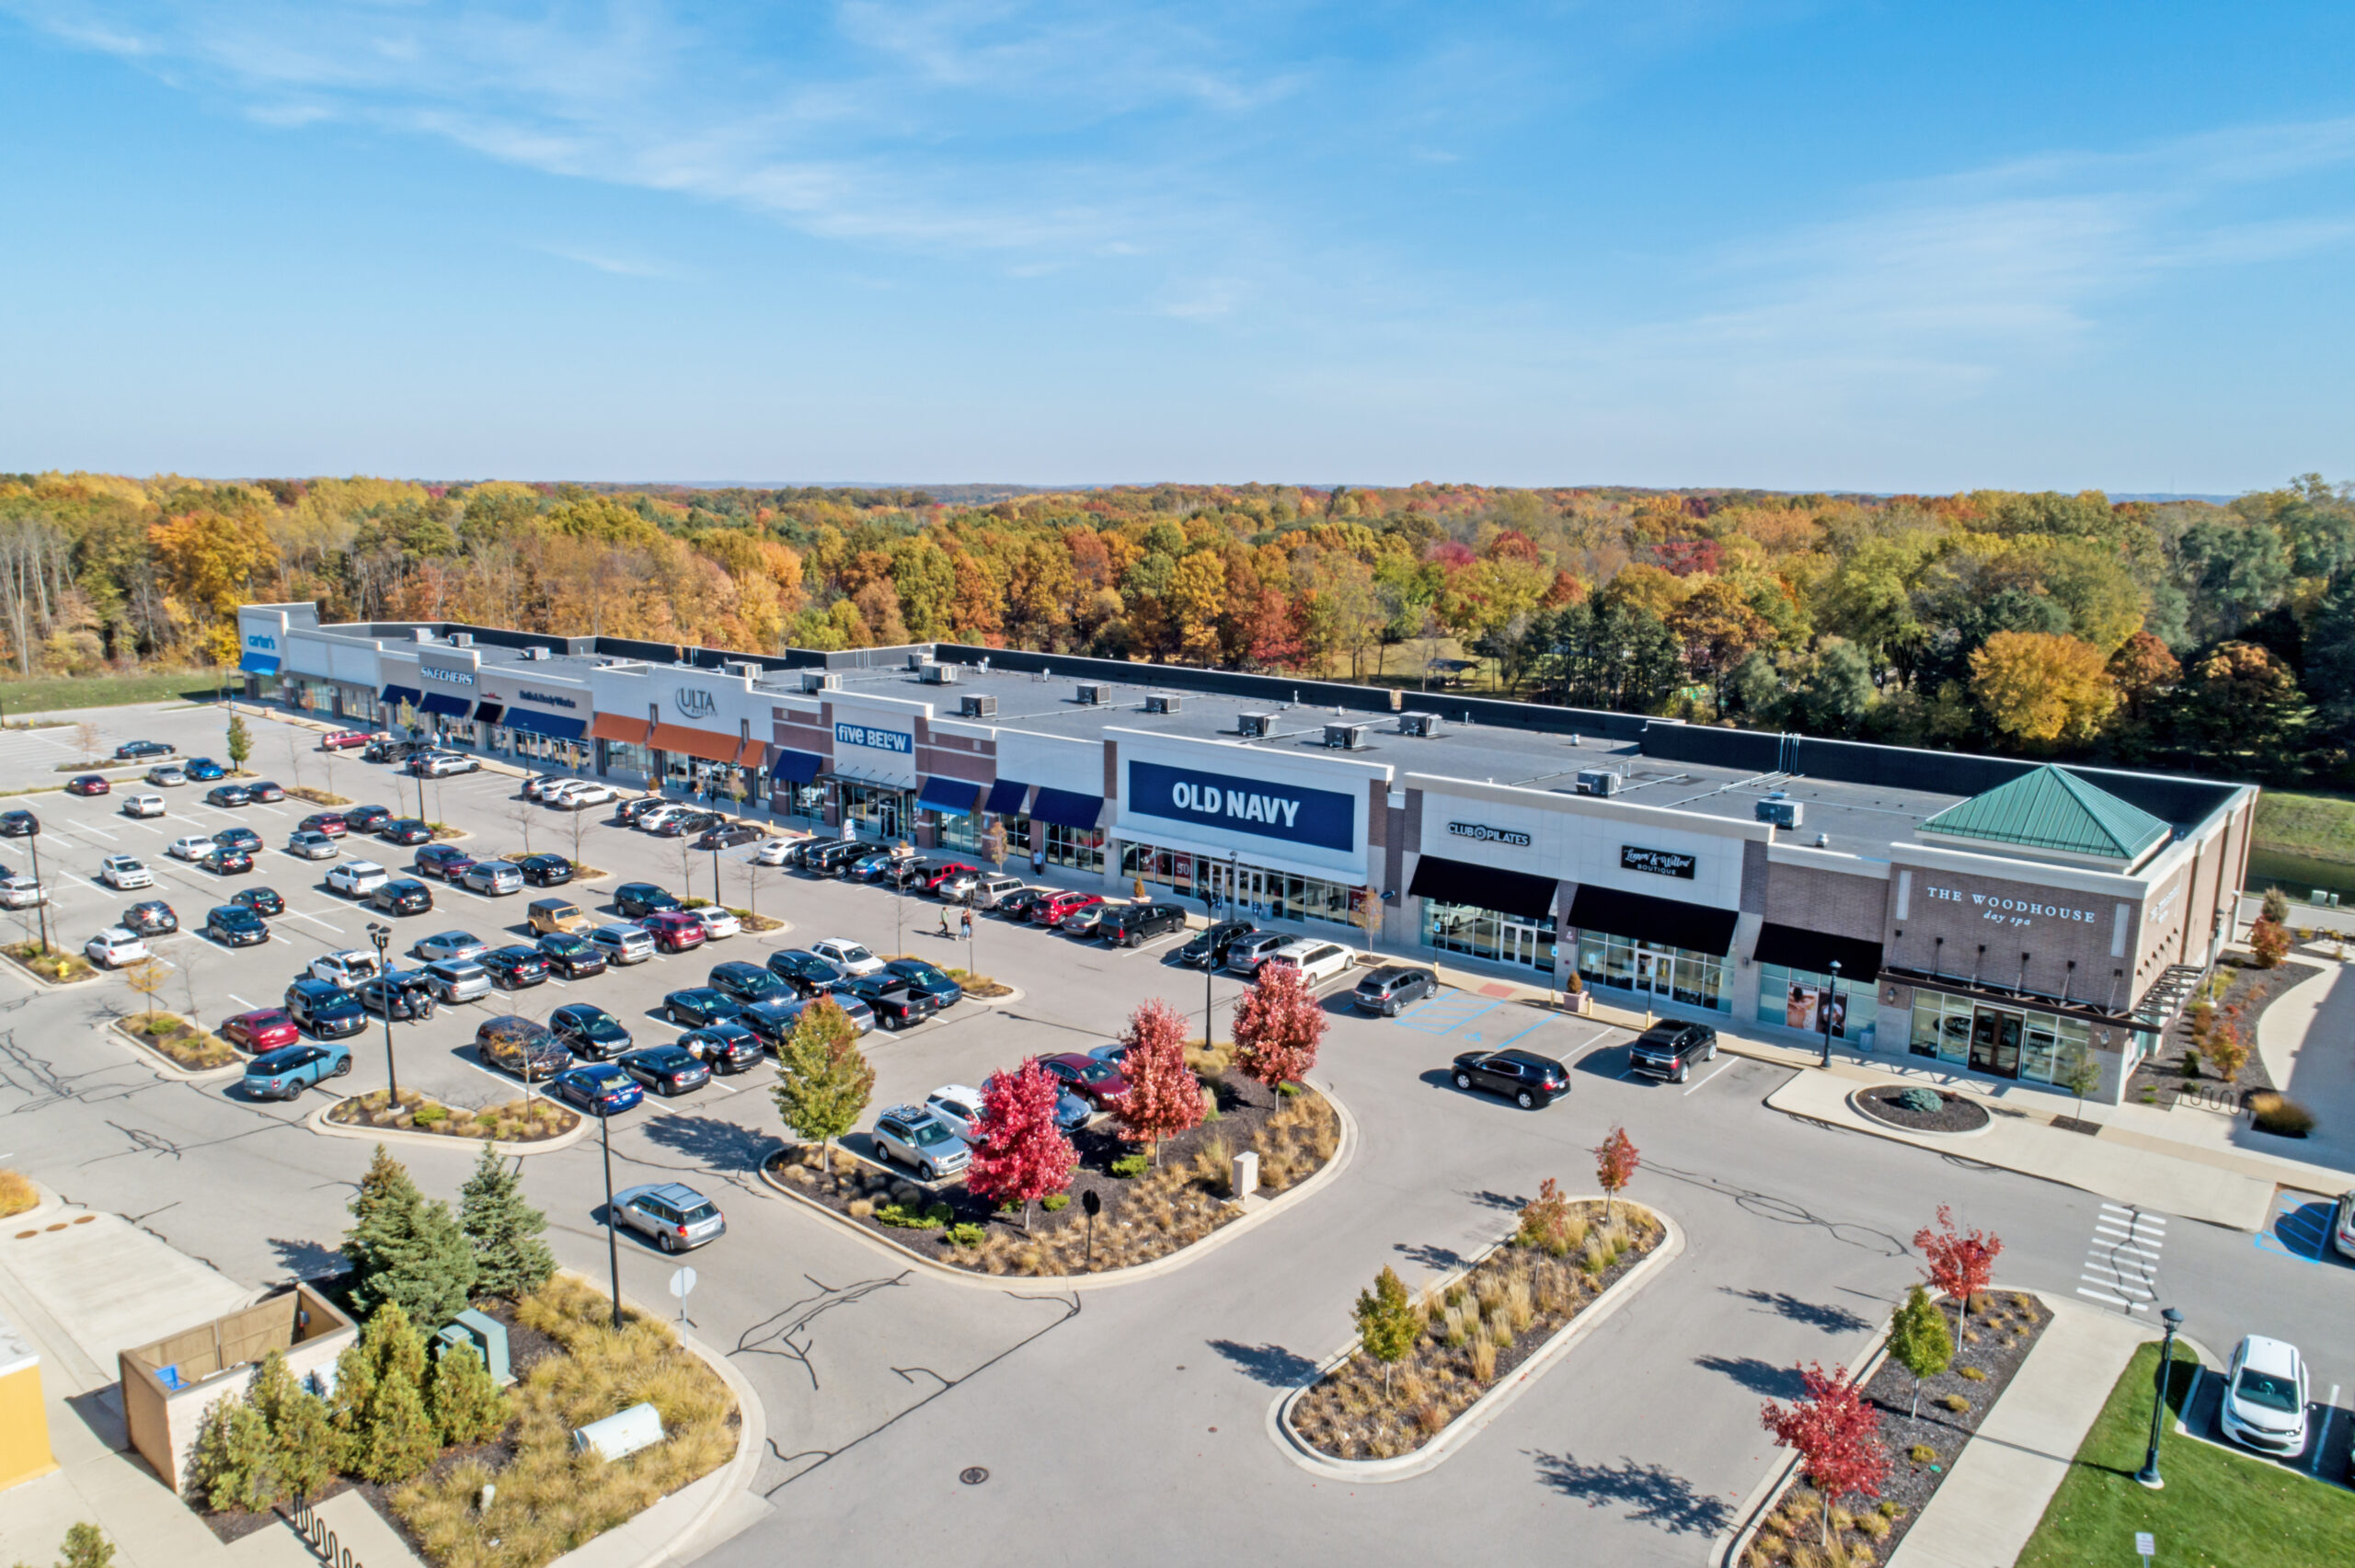 A Knapp's Corner strip mall with department store anchors like Old Navy and Ulta in Grand Rapids, MI.